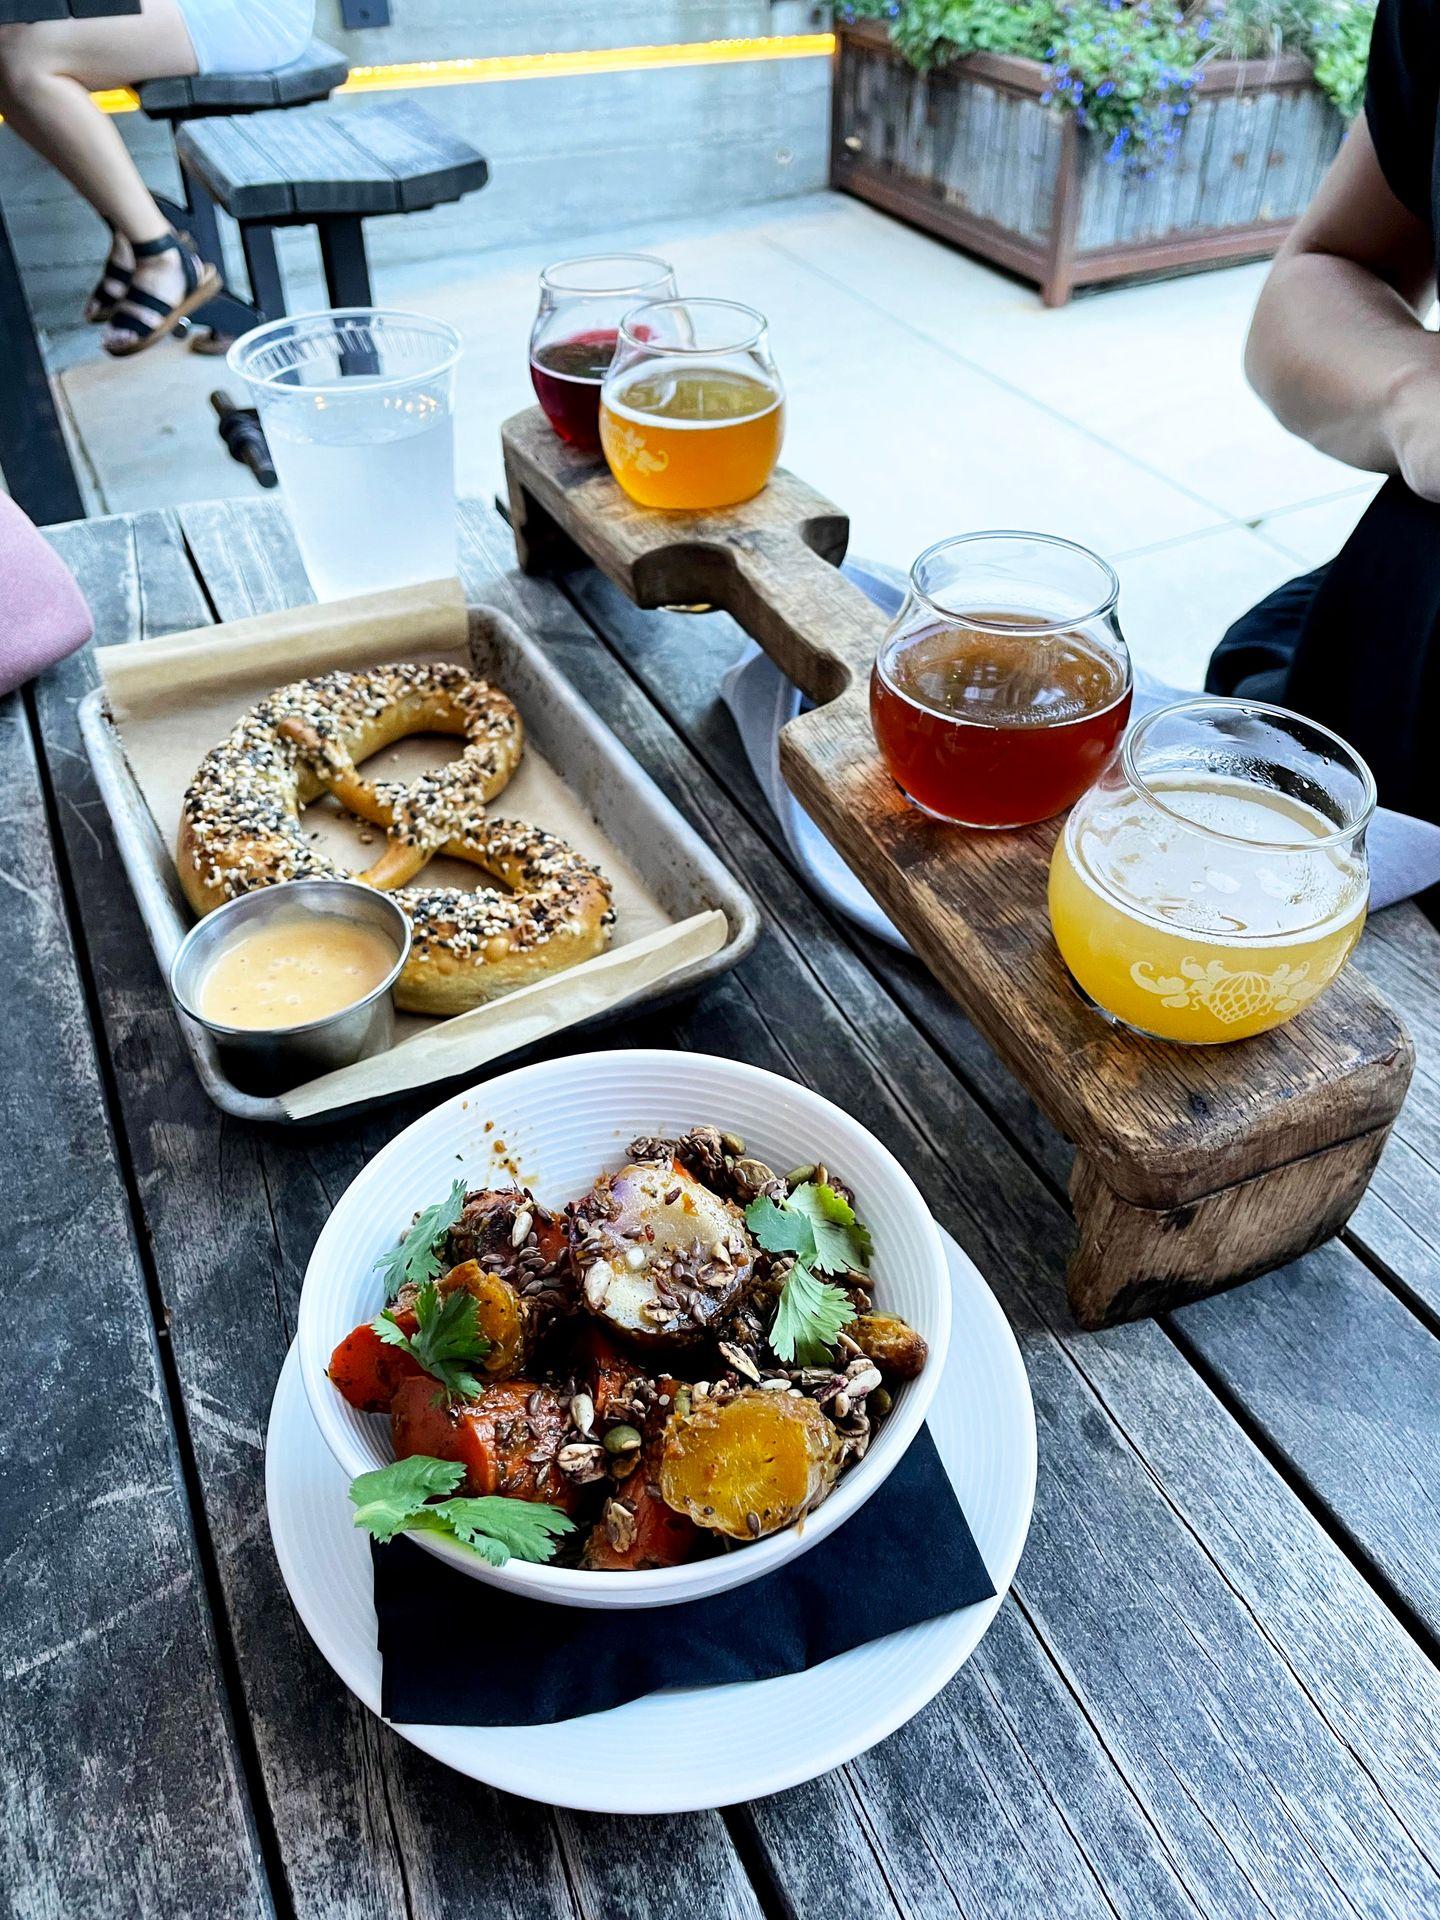 A soft pretzel, a plate of veggies and a flight of beer from Wicked Weed Funkatorium.